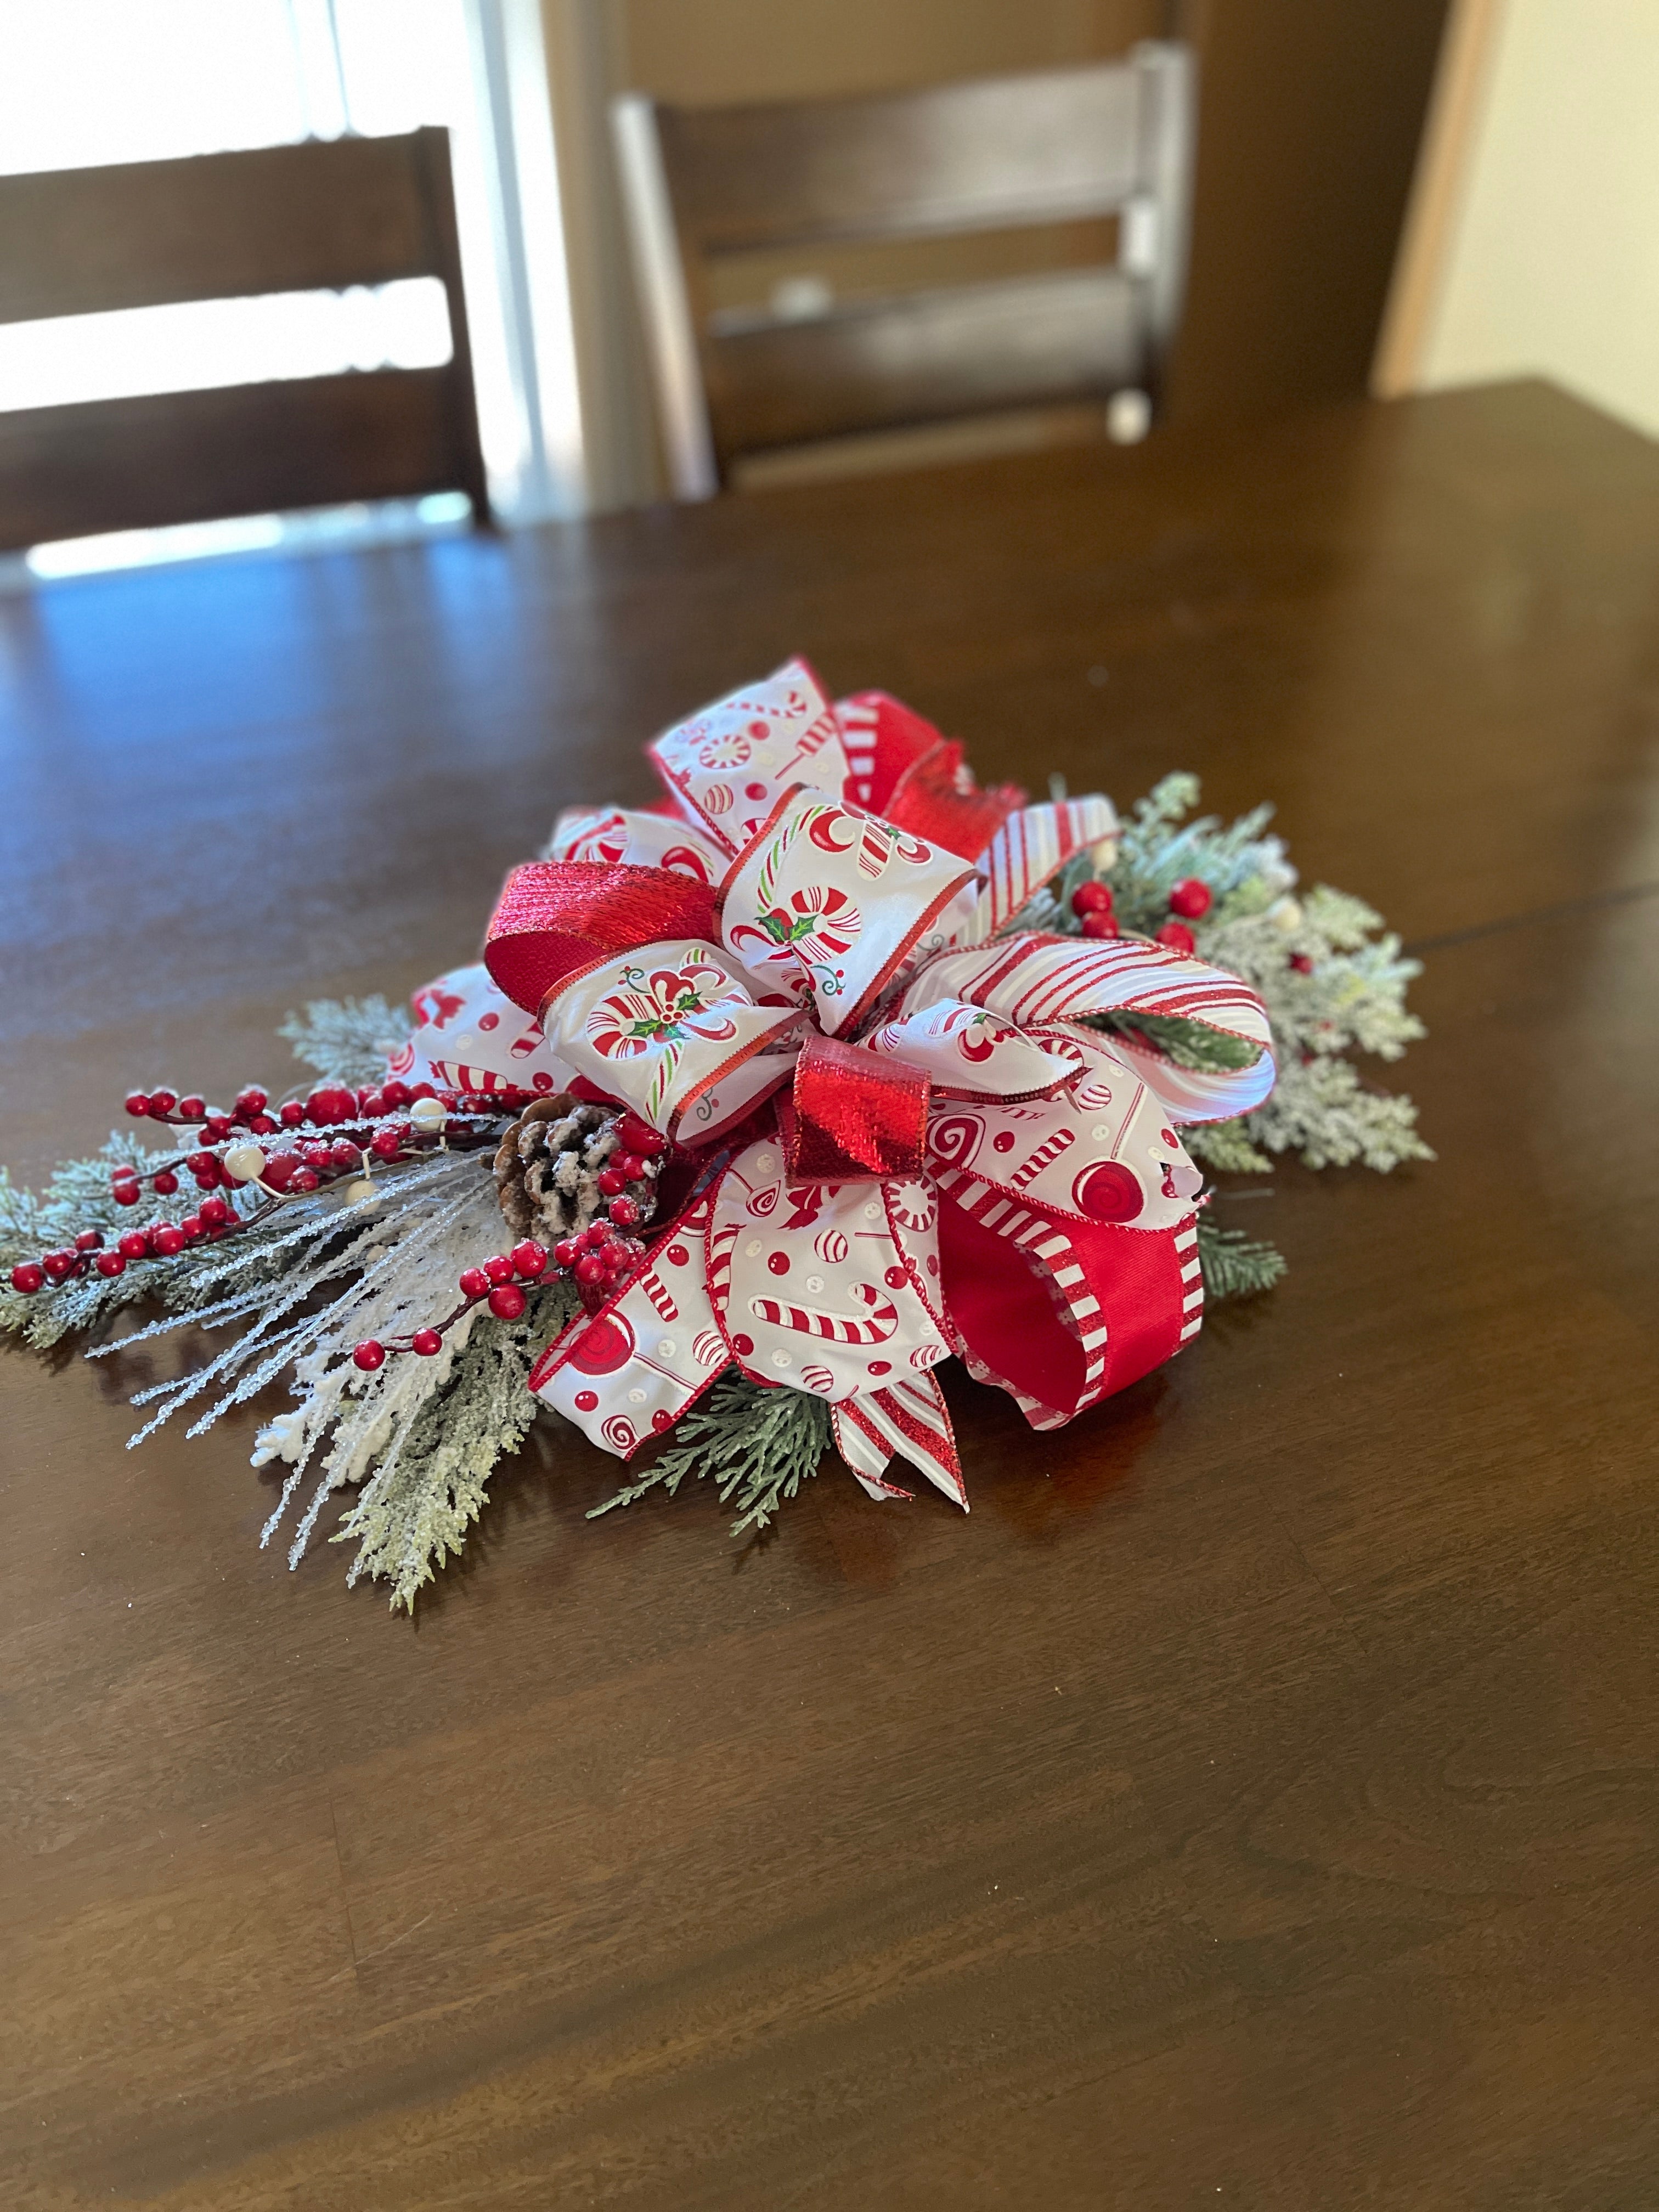 Red and White Candy Cane and Peppermint Lantern Swag with Evergreen Florals and Red Berries Used as a Centerpiece on a Table